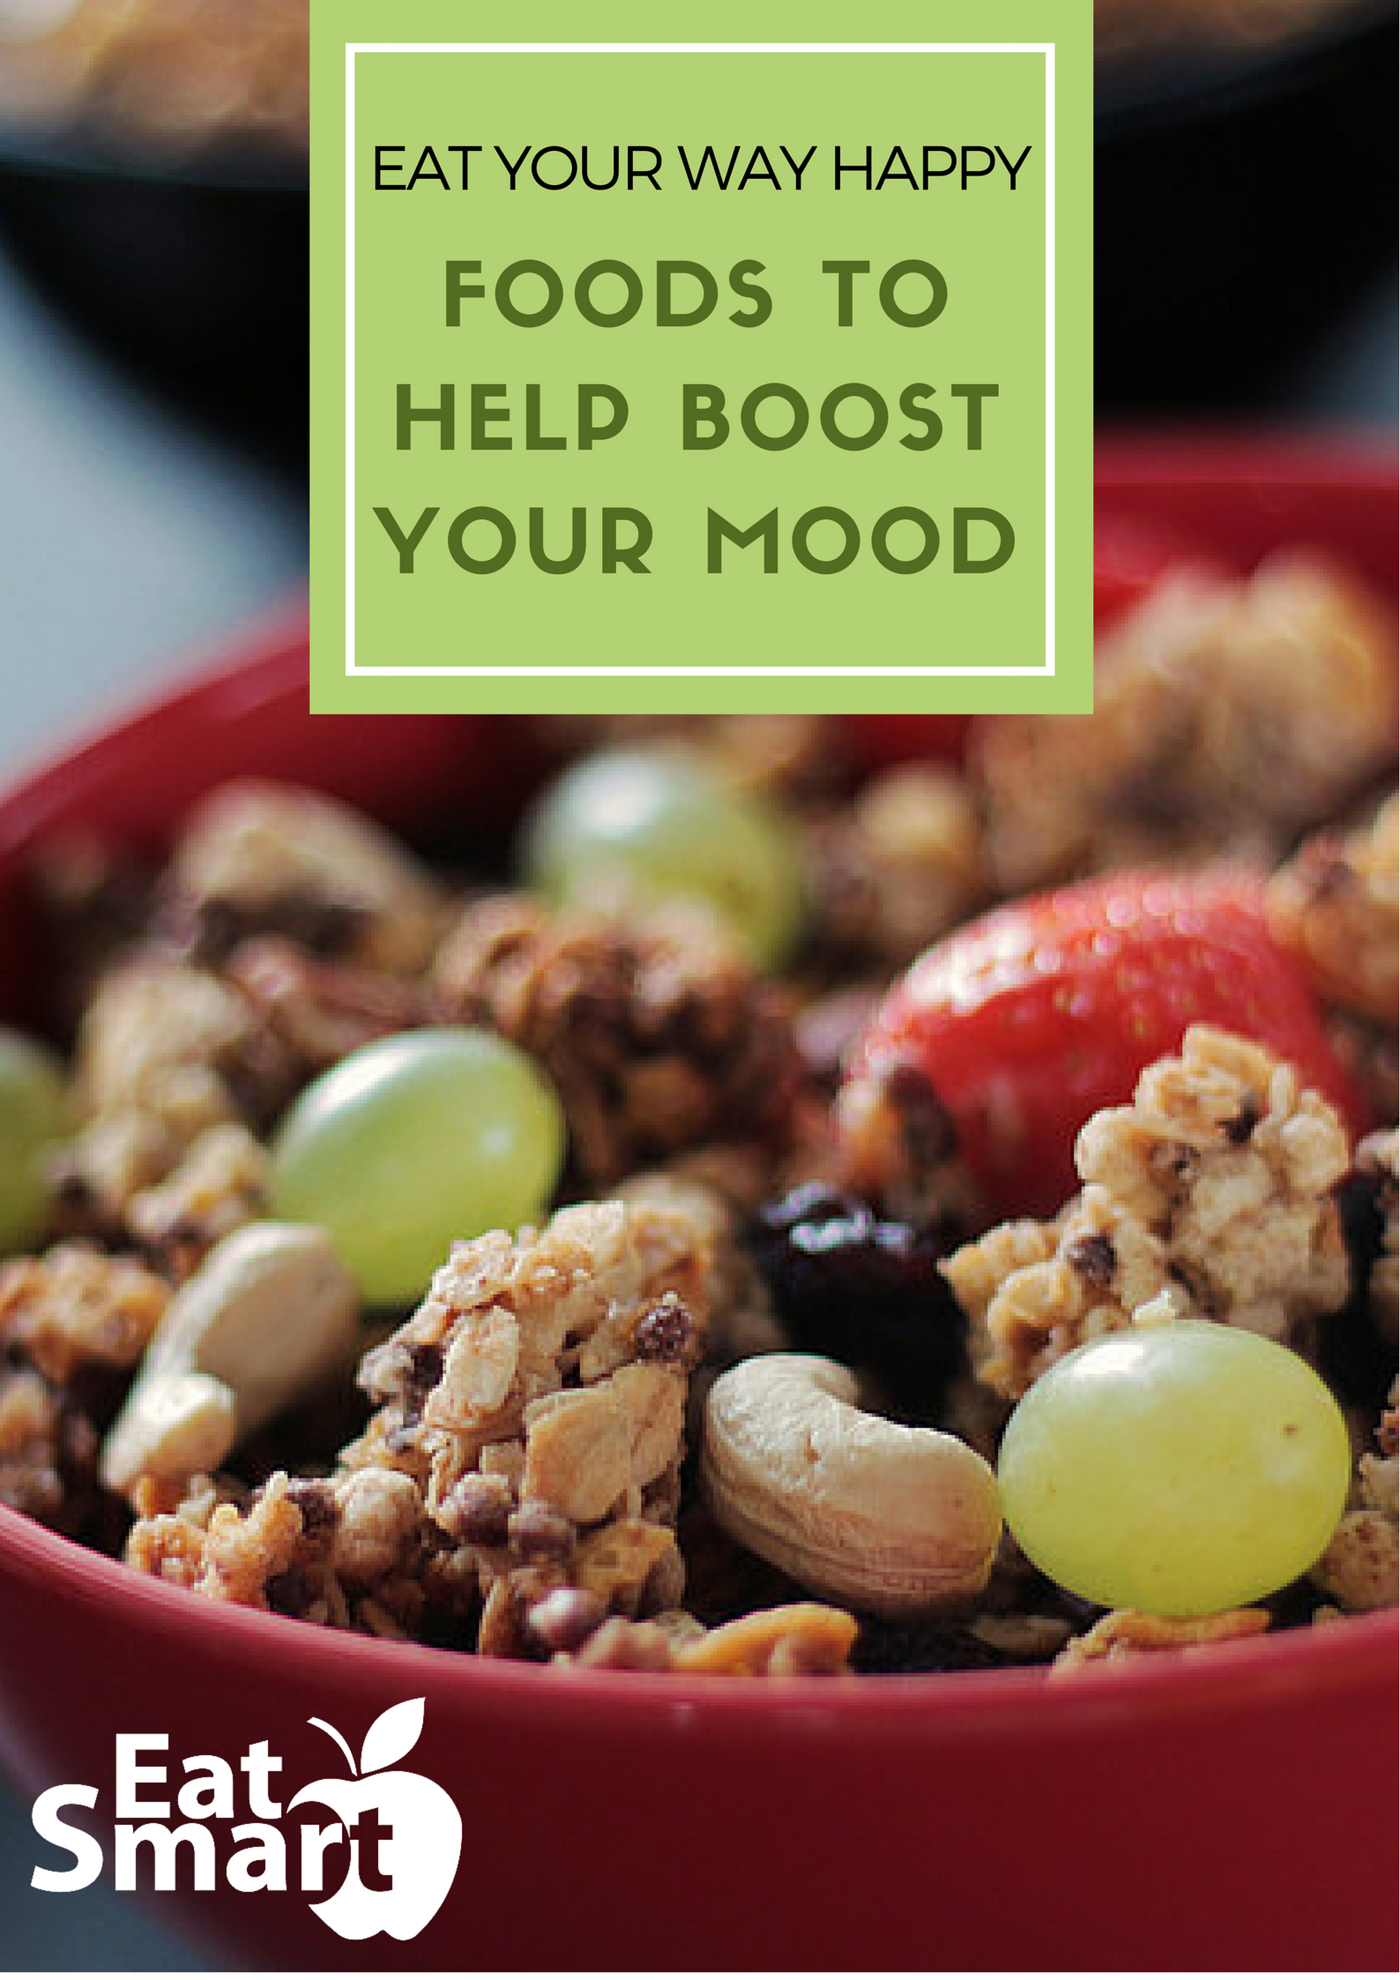 Eat Your Way Happy - Foods to Help Boost Your Mood